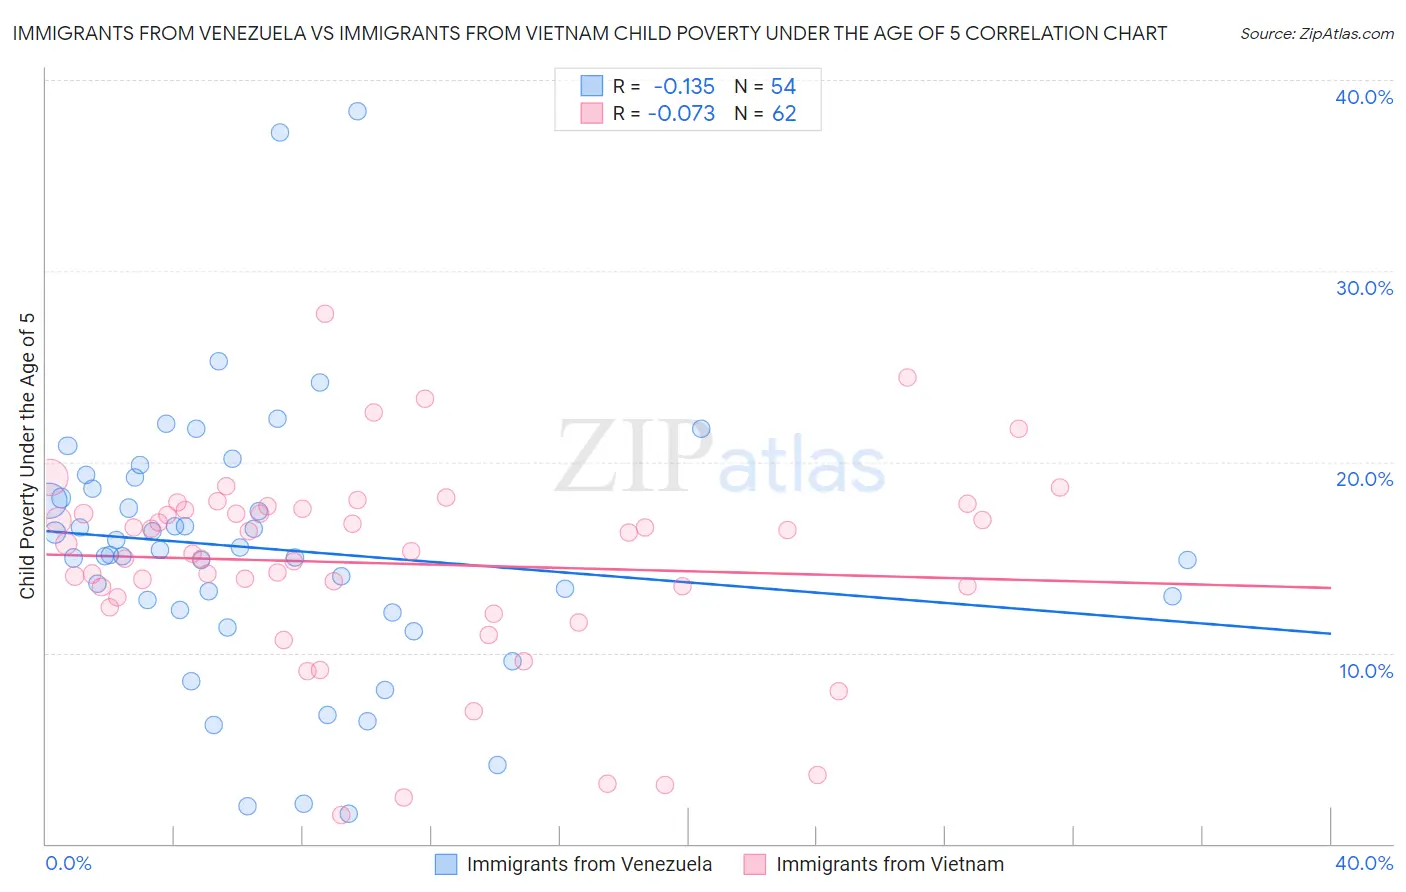 Immigrants from Venezuela vs Immigrants from Vietnam Child Poverty Under the Age of 5